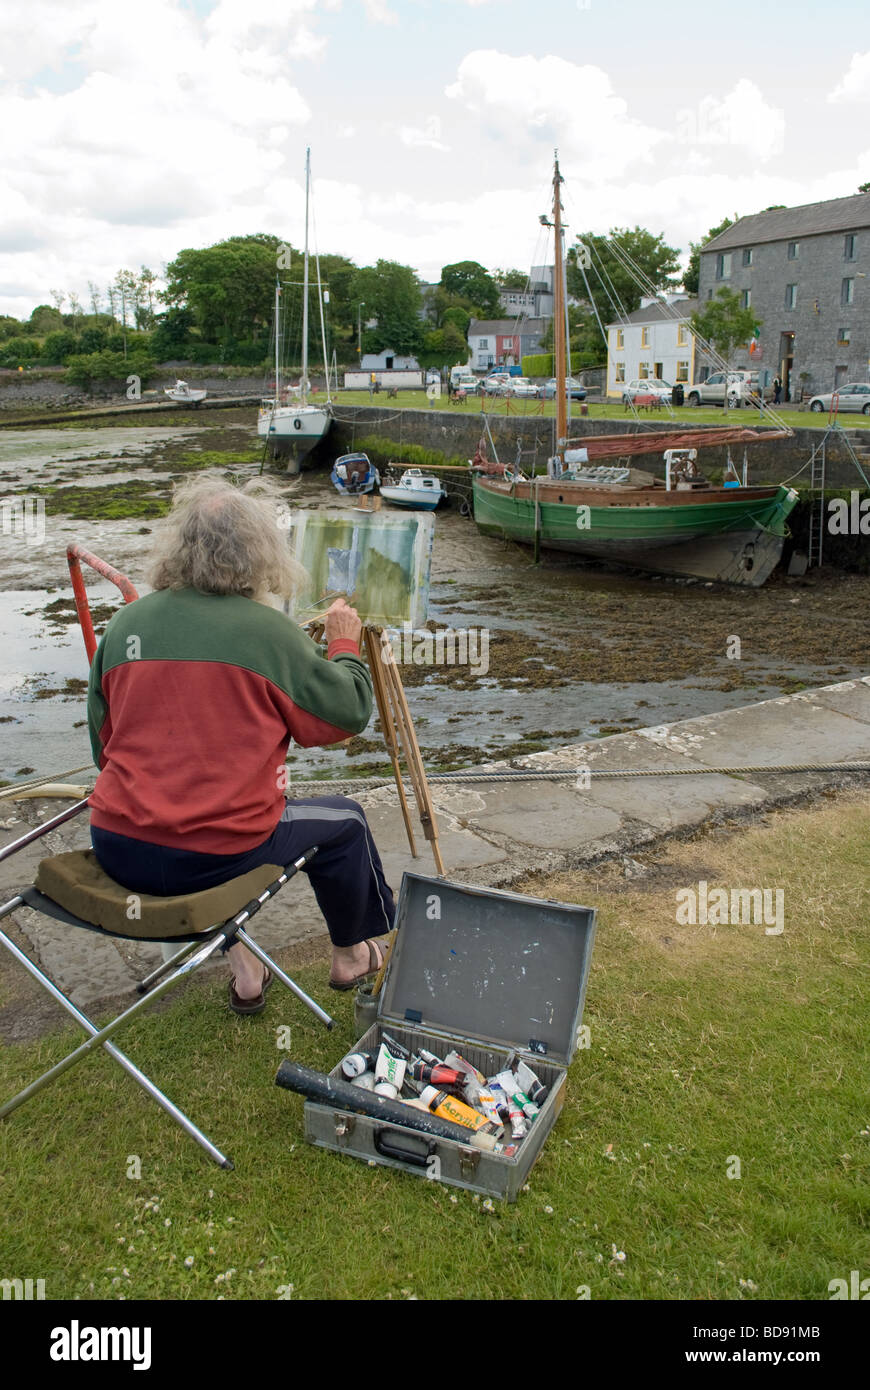 Unknown artist painting picture in Kinvara village harbour, County Galway, Ireland Stock Photo